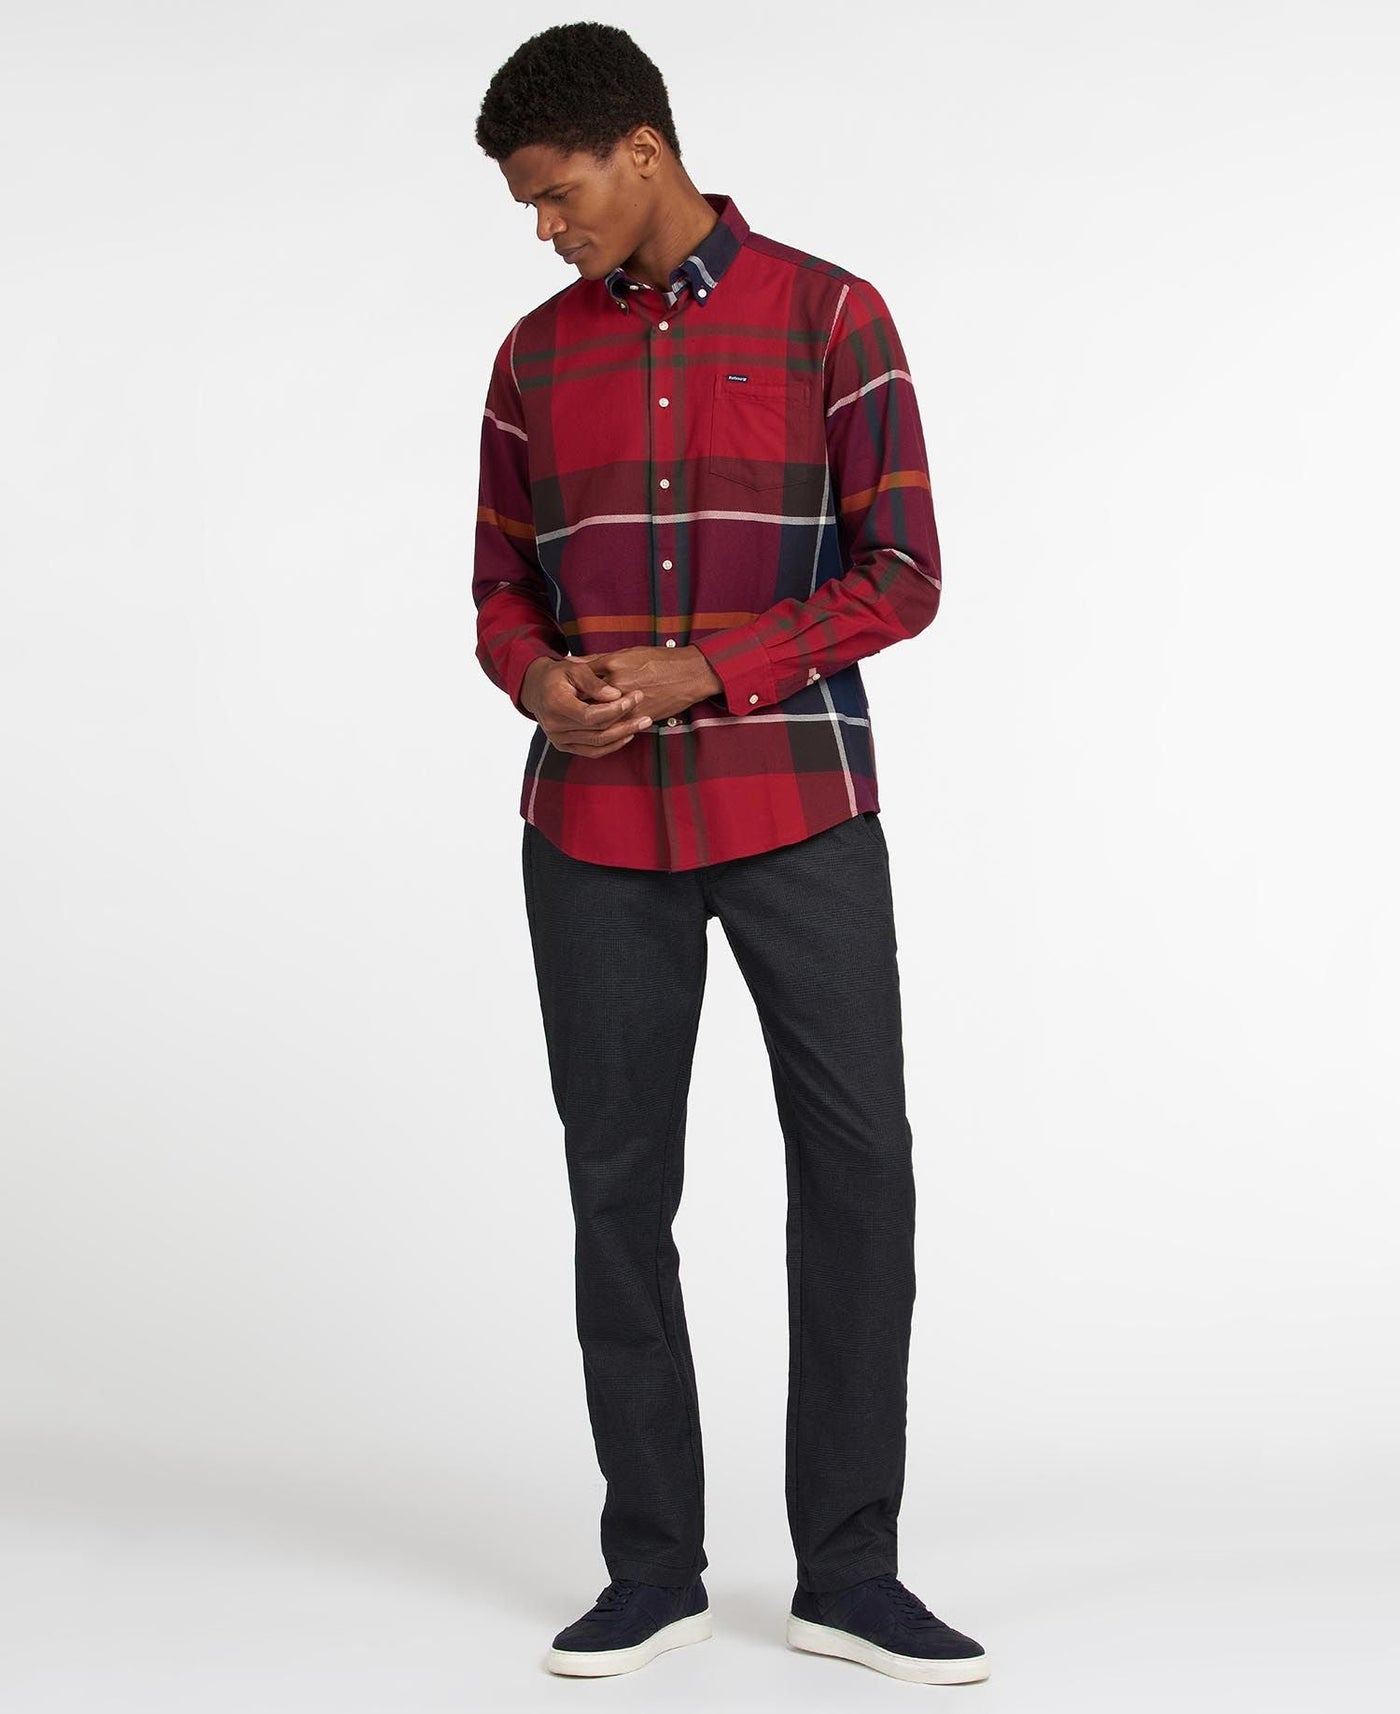 Barbour Chemise red Dunoon - Lothaire boutiques